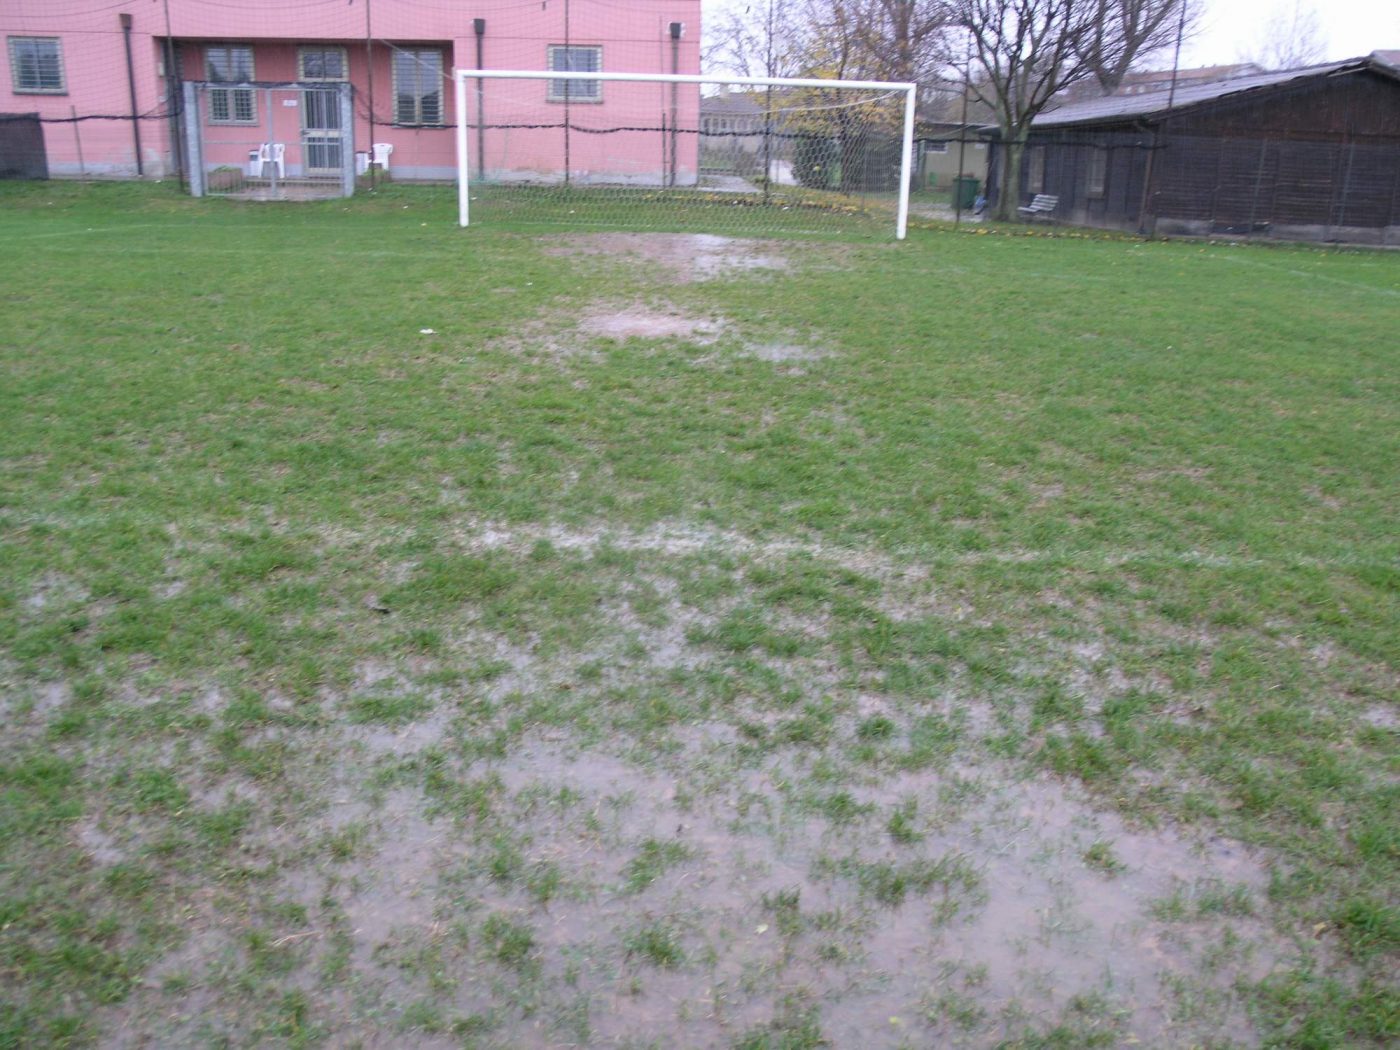 Amateur Football – Inclement Weather: All Division Two provincial leagues suspended to essential activities.  Even the Open League stops at 11 Uisp